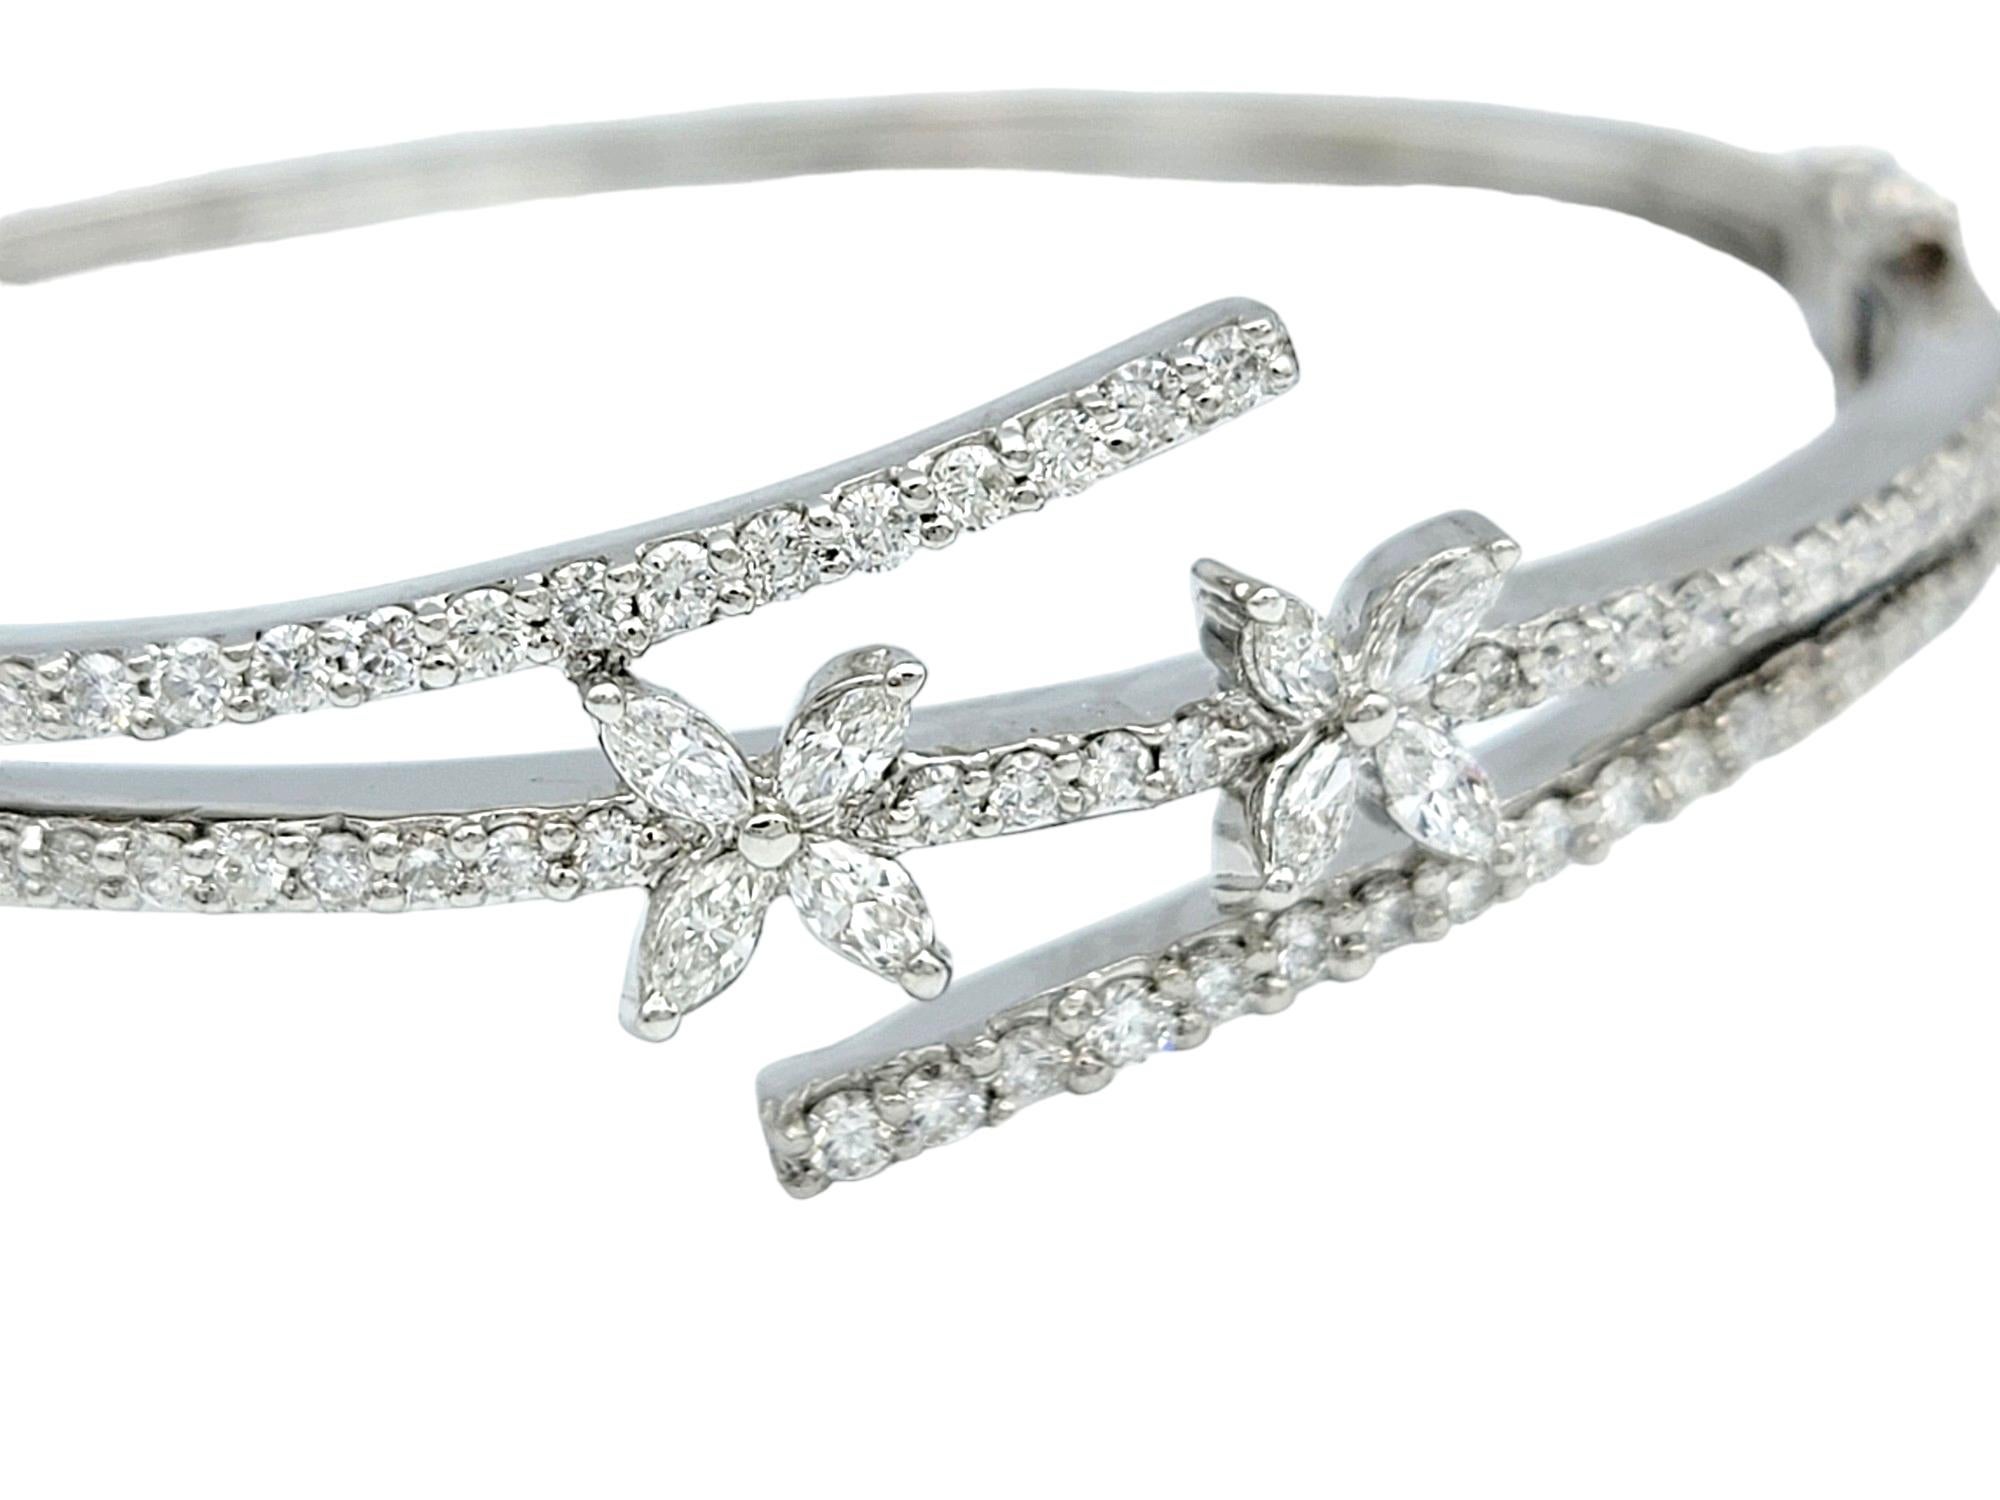 This gorgeous diamond bangle bracelet, crafted in luxurious 18 karat white gold, exudes elegance and sophistication. Designed in a bypass style, the bracelet features a unique arrangement of marquise diamonds arranged in a pretty flower formation,